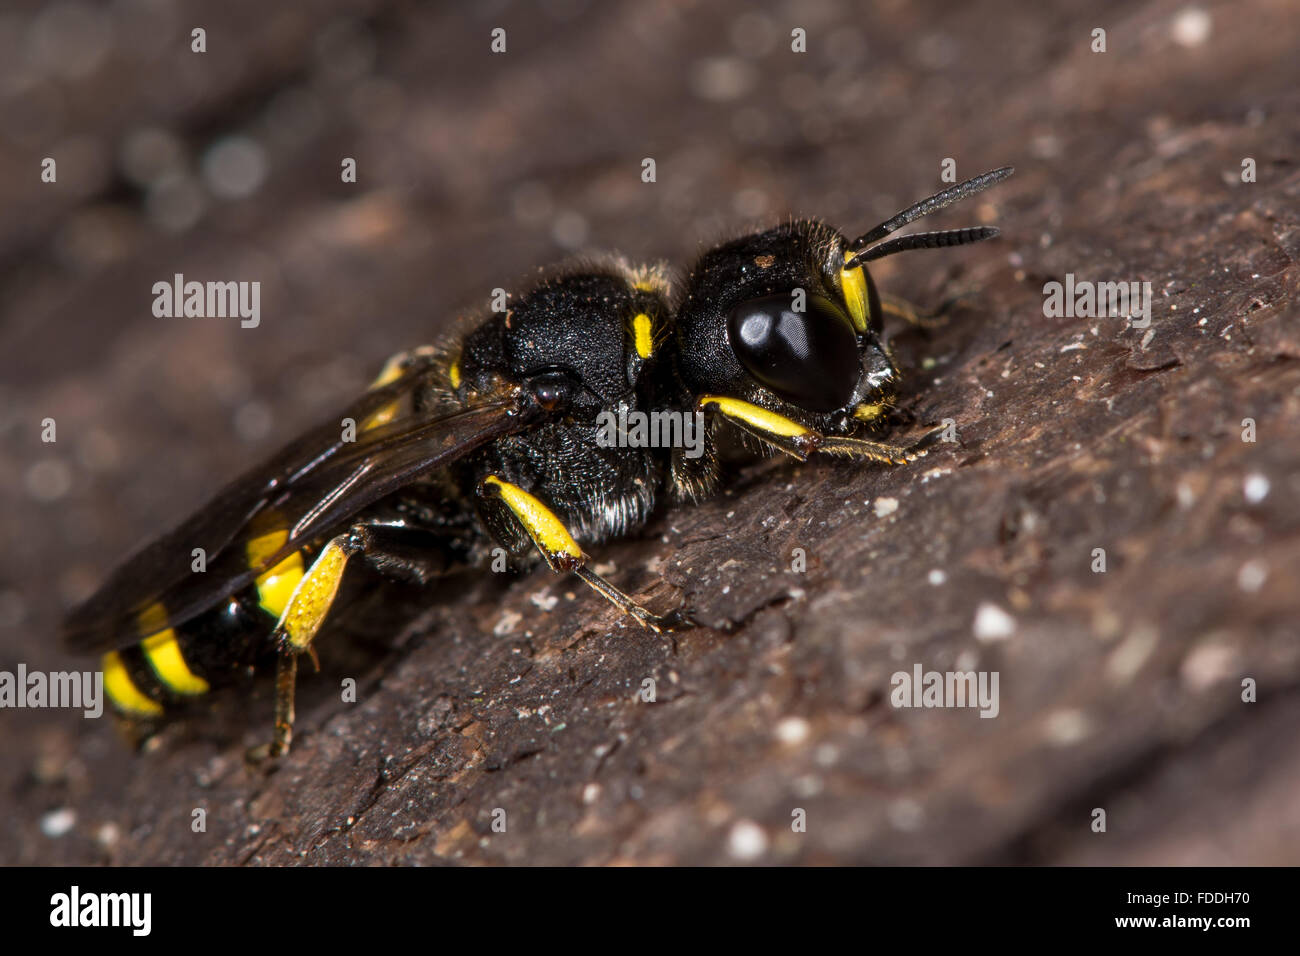 Ectemnius continuus digger wasp. A solitary wasp in the family Crabronidae, at rest on wood Stock Photo